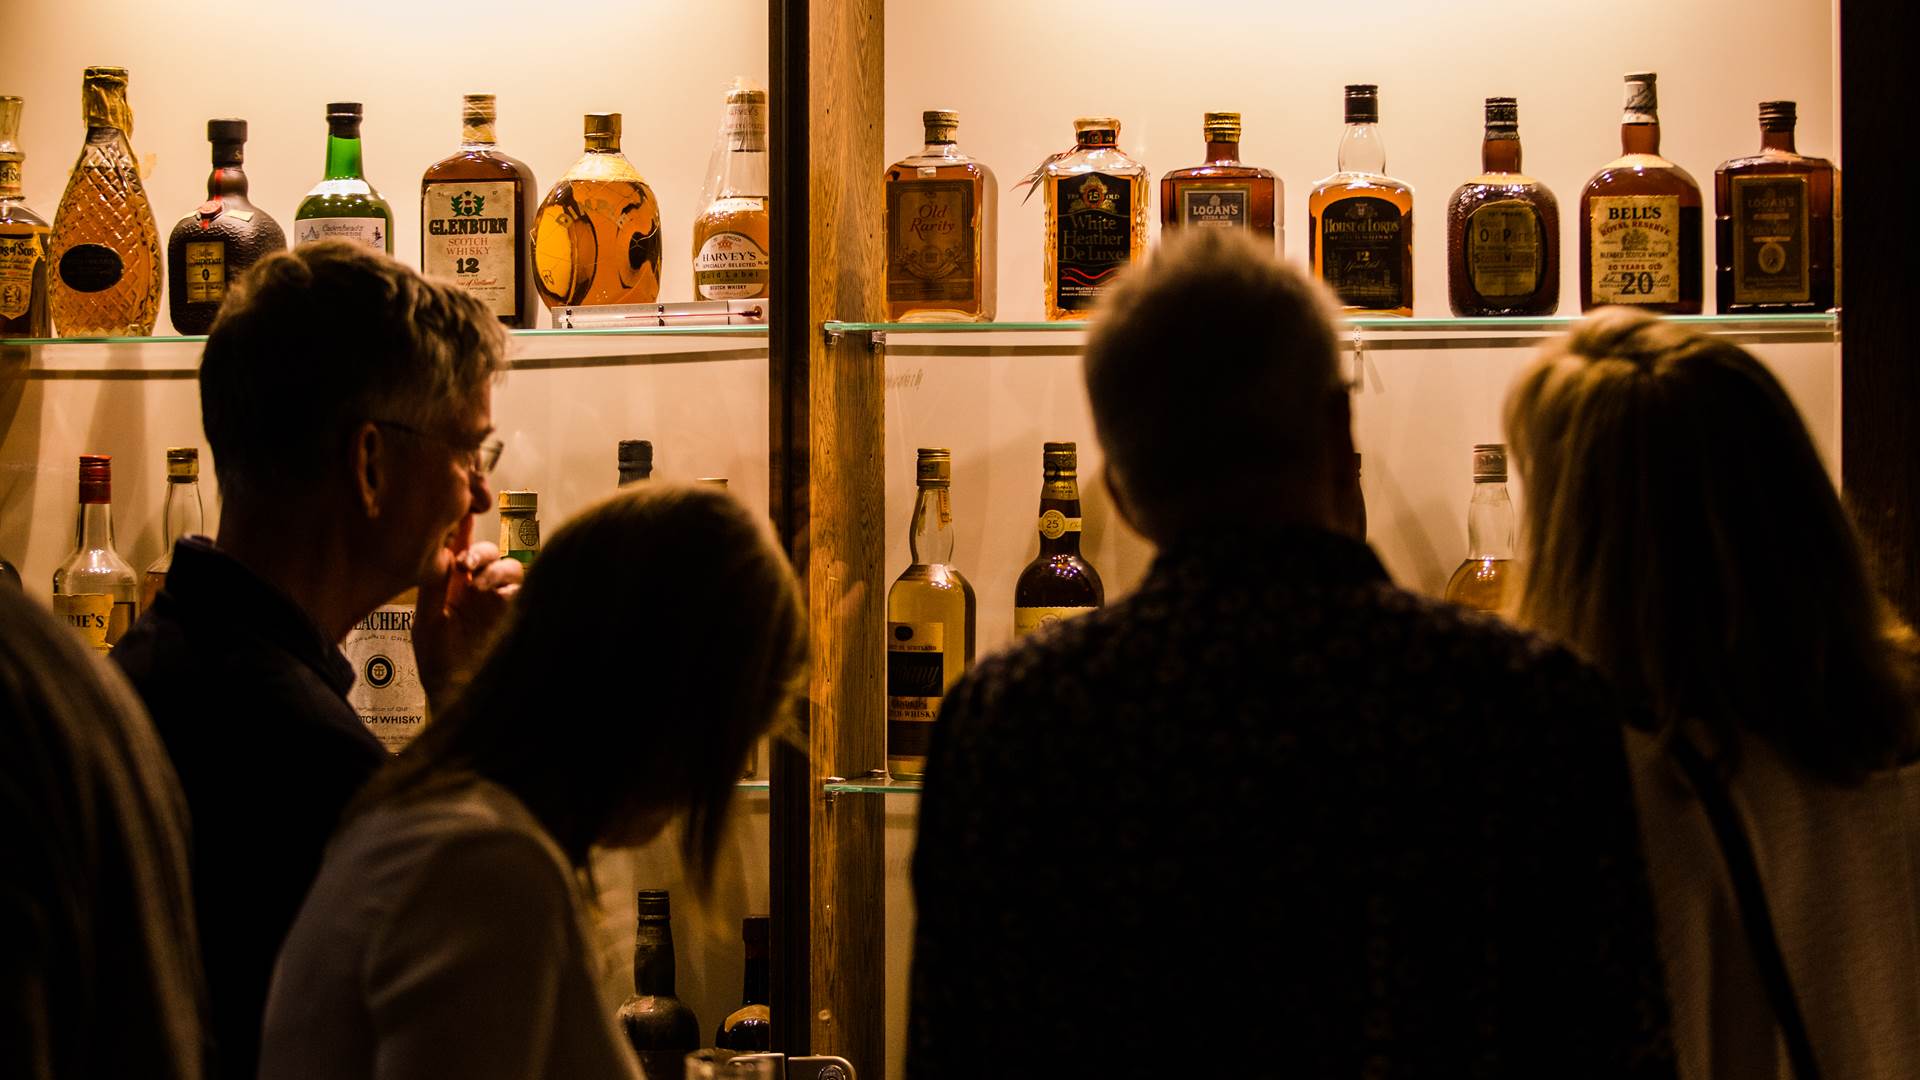 Group of guests observing whisky collection at The Clydeside Distillery